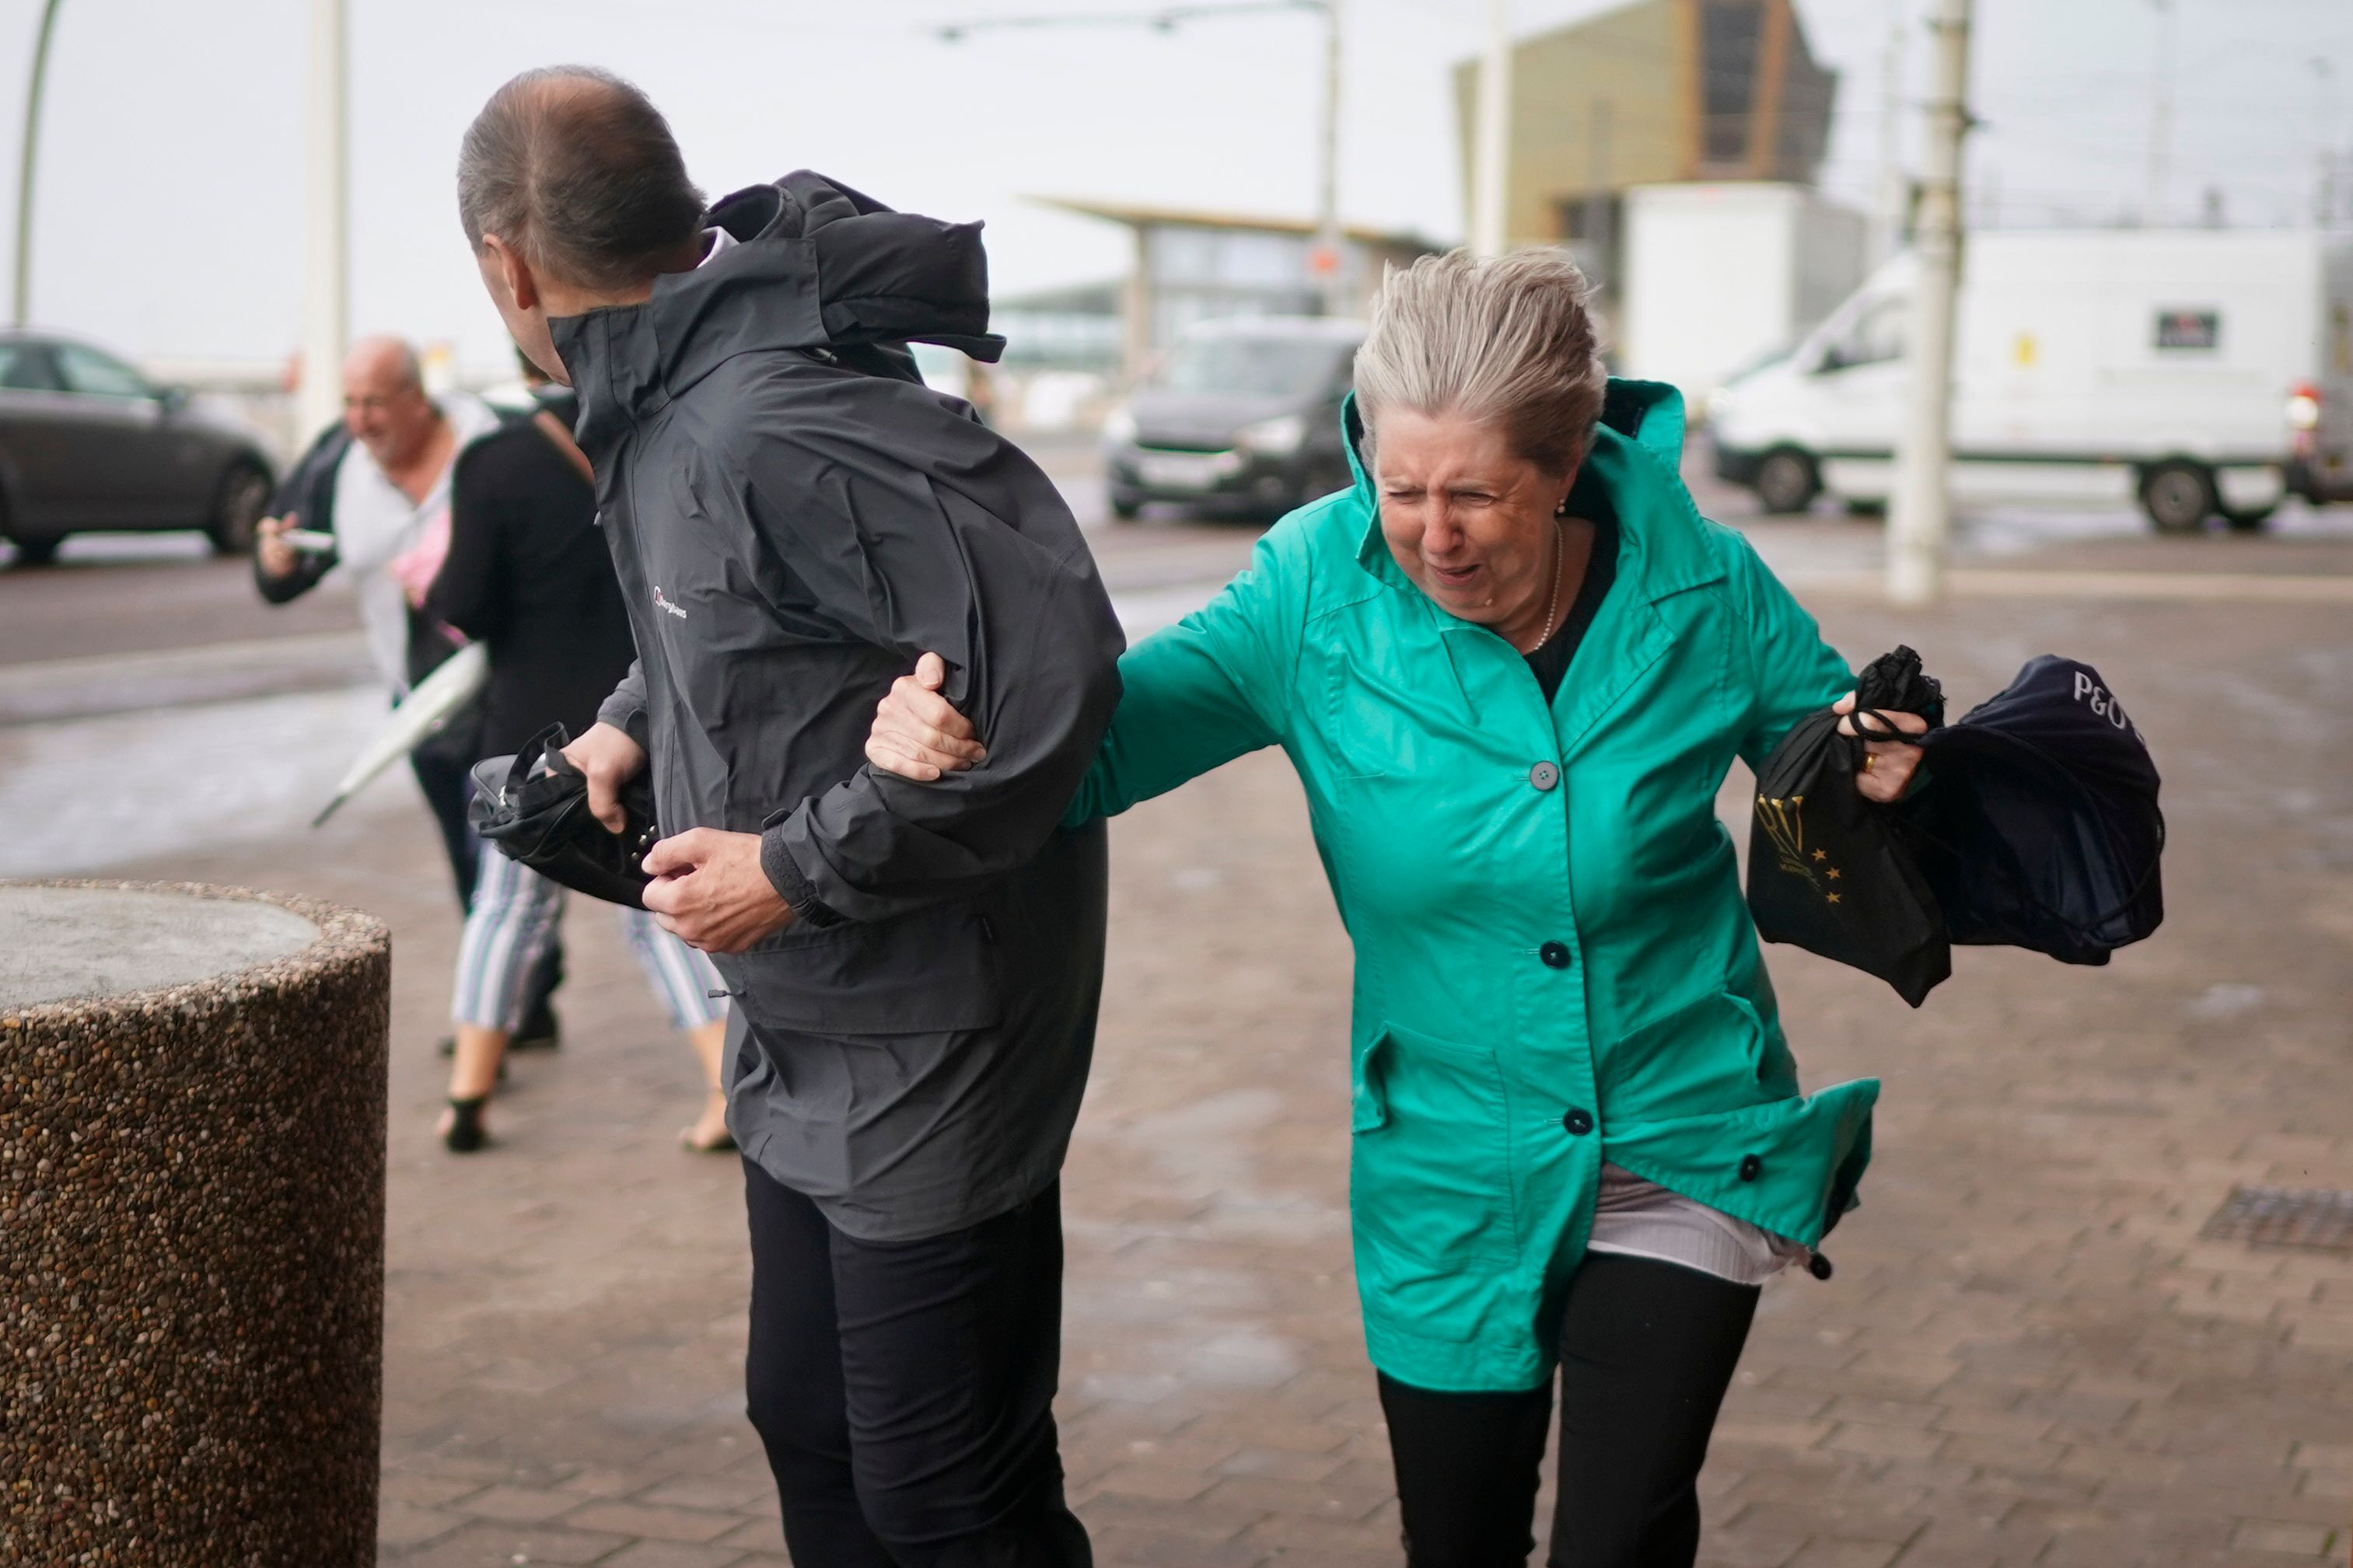 BLACKPOOL, ENGLAND - SEPTEMBER 19: Members of the public struggle in the wind as Storm Ali hits land on September 19, 2018 in Blackpool, England. Severe gales which are set to get up to as much as 80mph are causing road, rail and ferry travel disruption as Storm Ali hits parts of the United Kigndom. (Photo by Christopher Furlong/Getty Images)